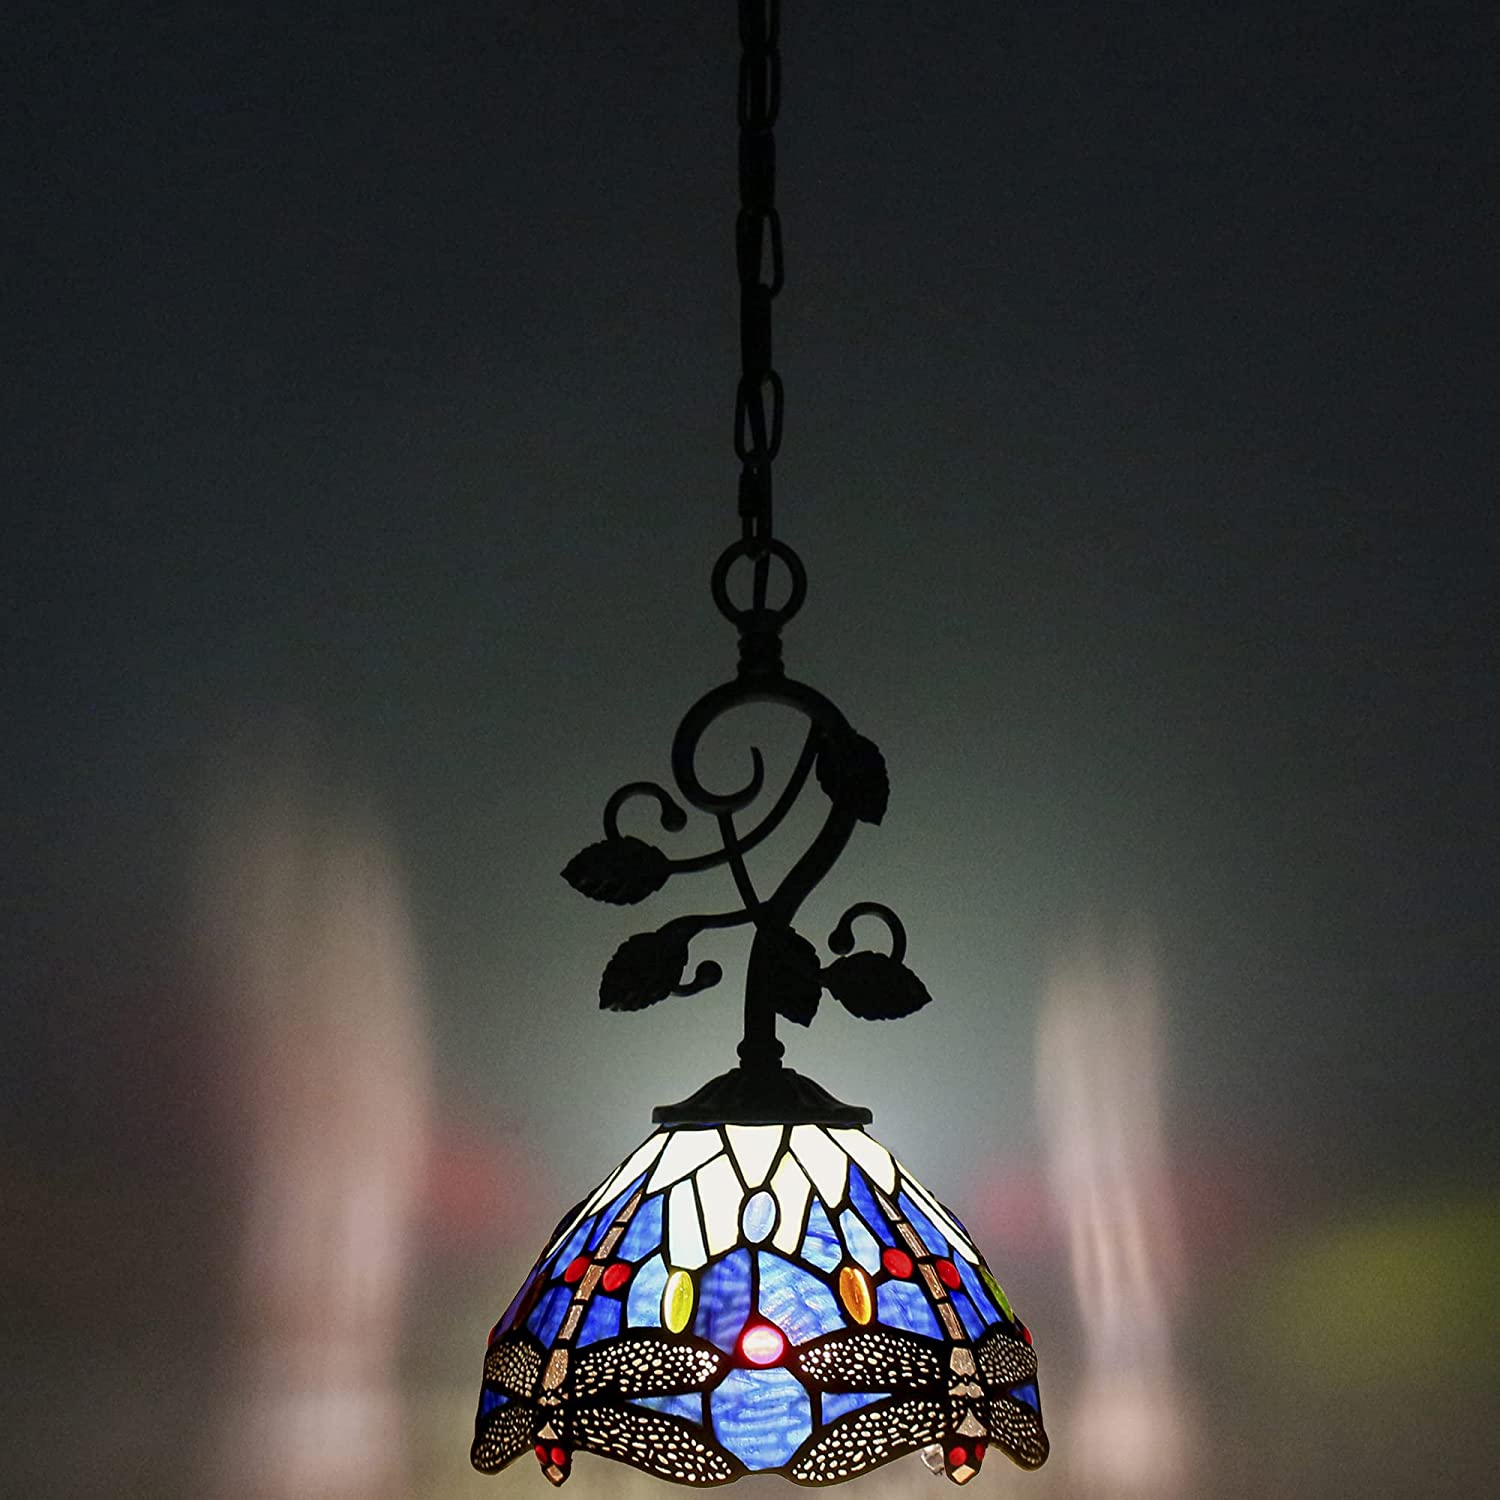 Werfactory® Tiffany Pendant Light with 8" Blue Stained Glass Dragonfly Hanging Lamp